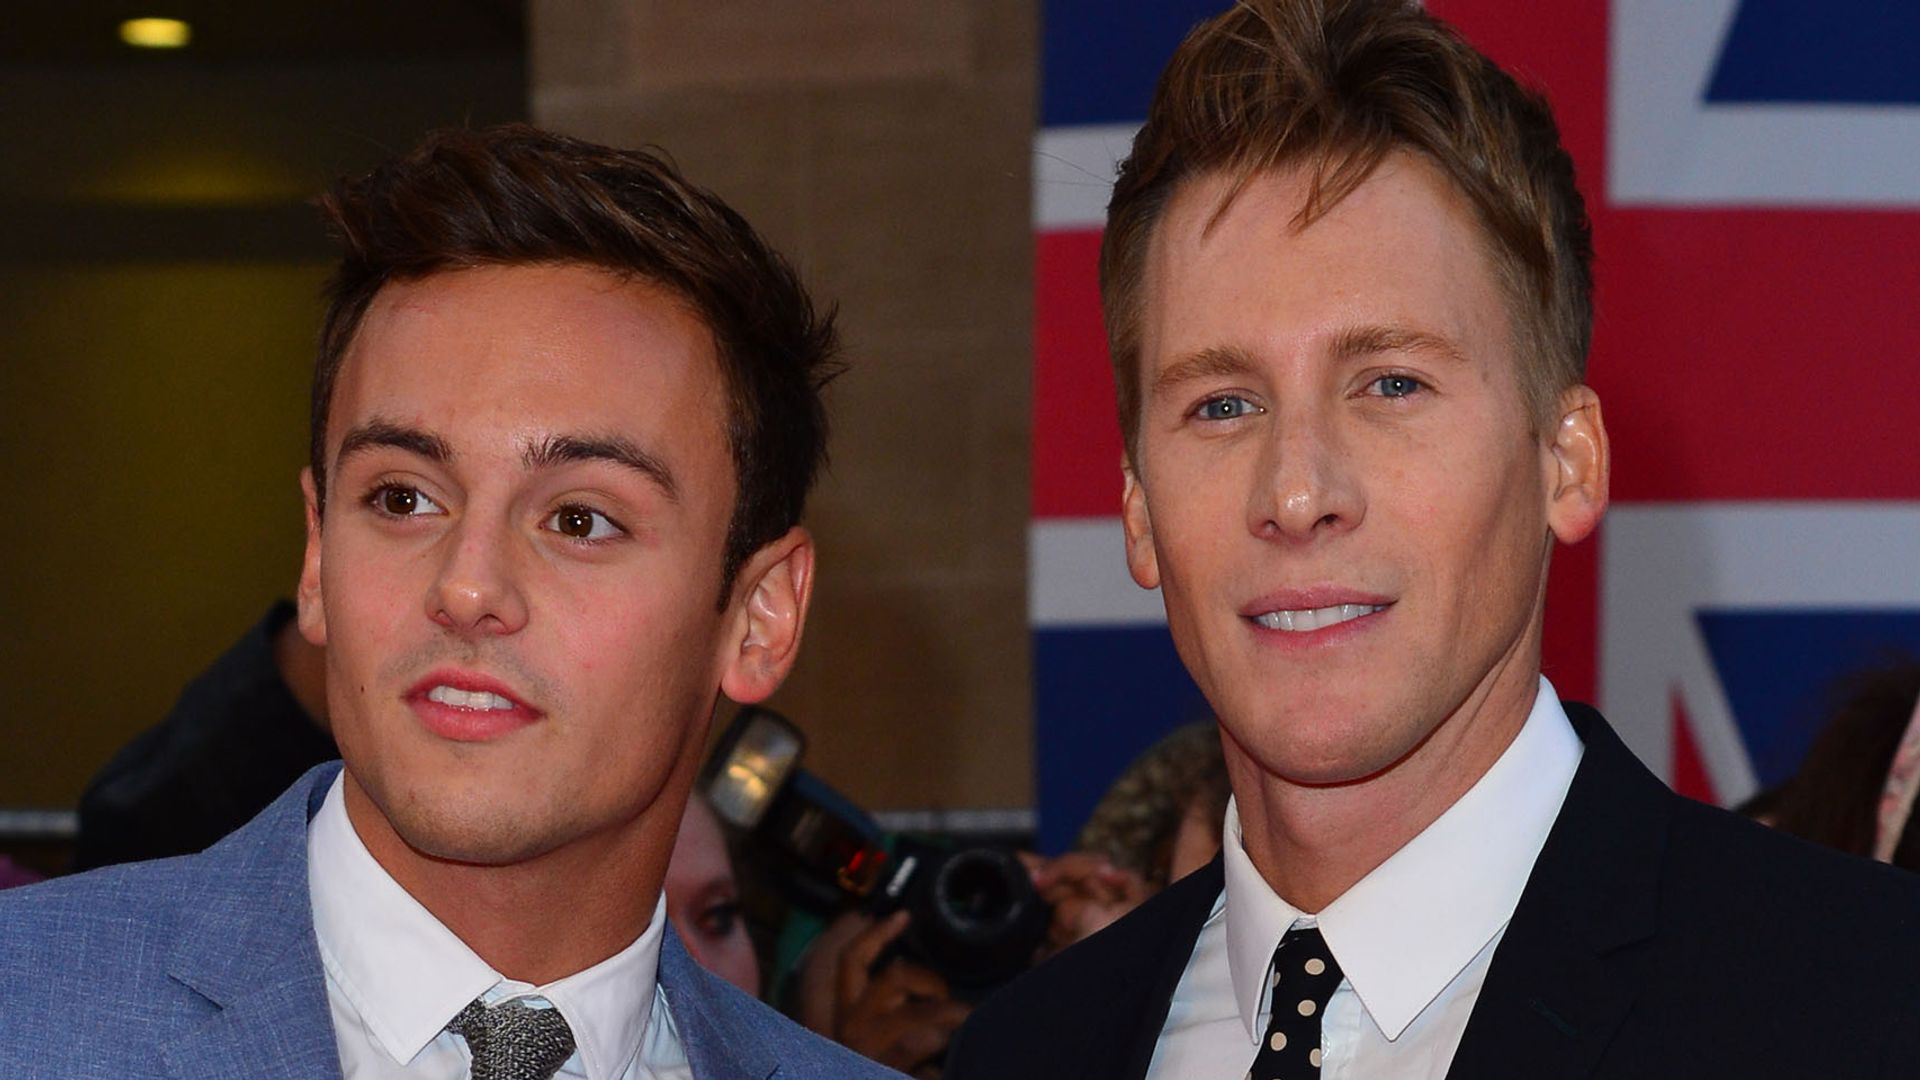 Tom Daley in a blue suit and Dustin Lance Black in a black suit